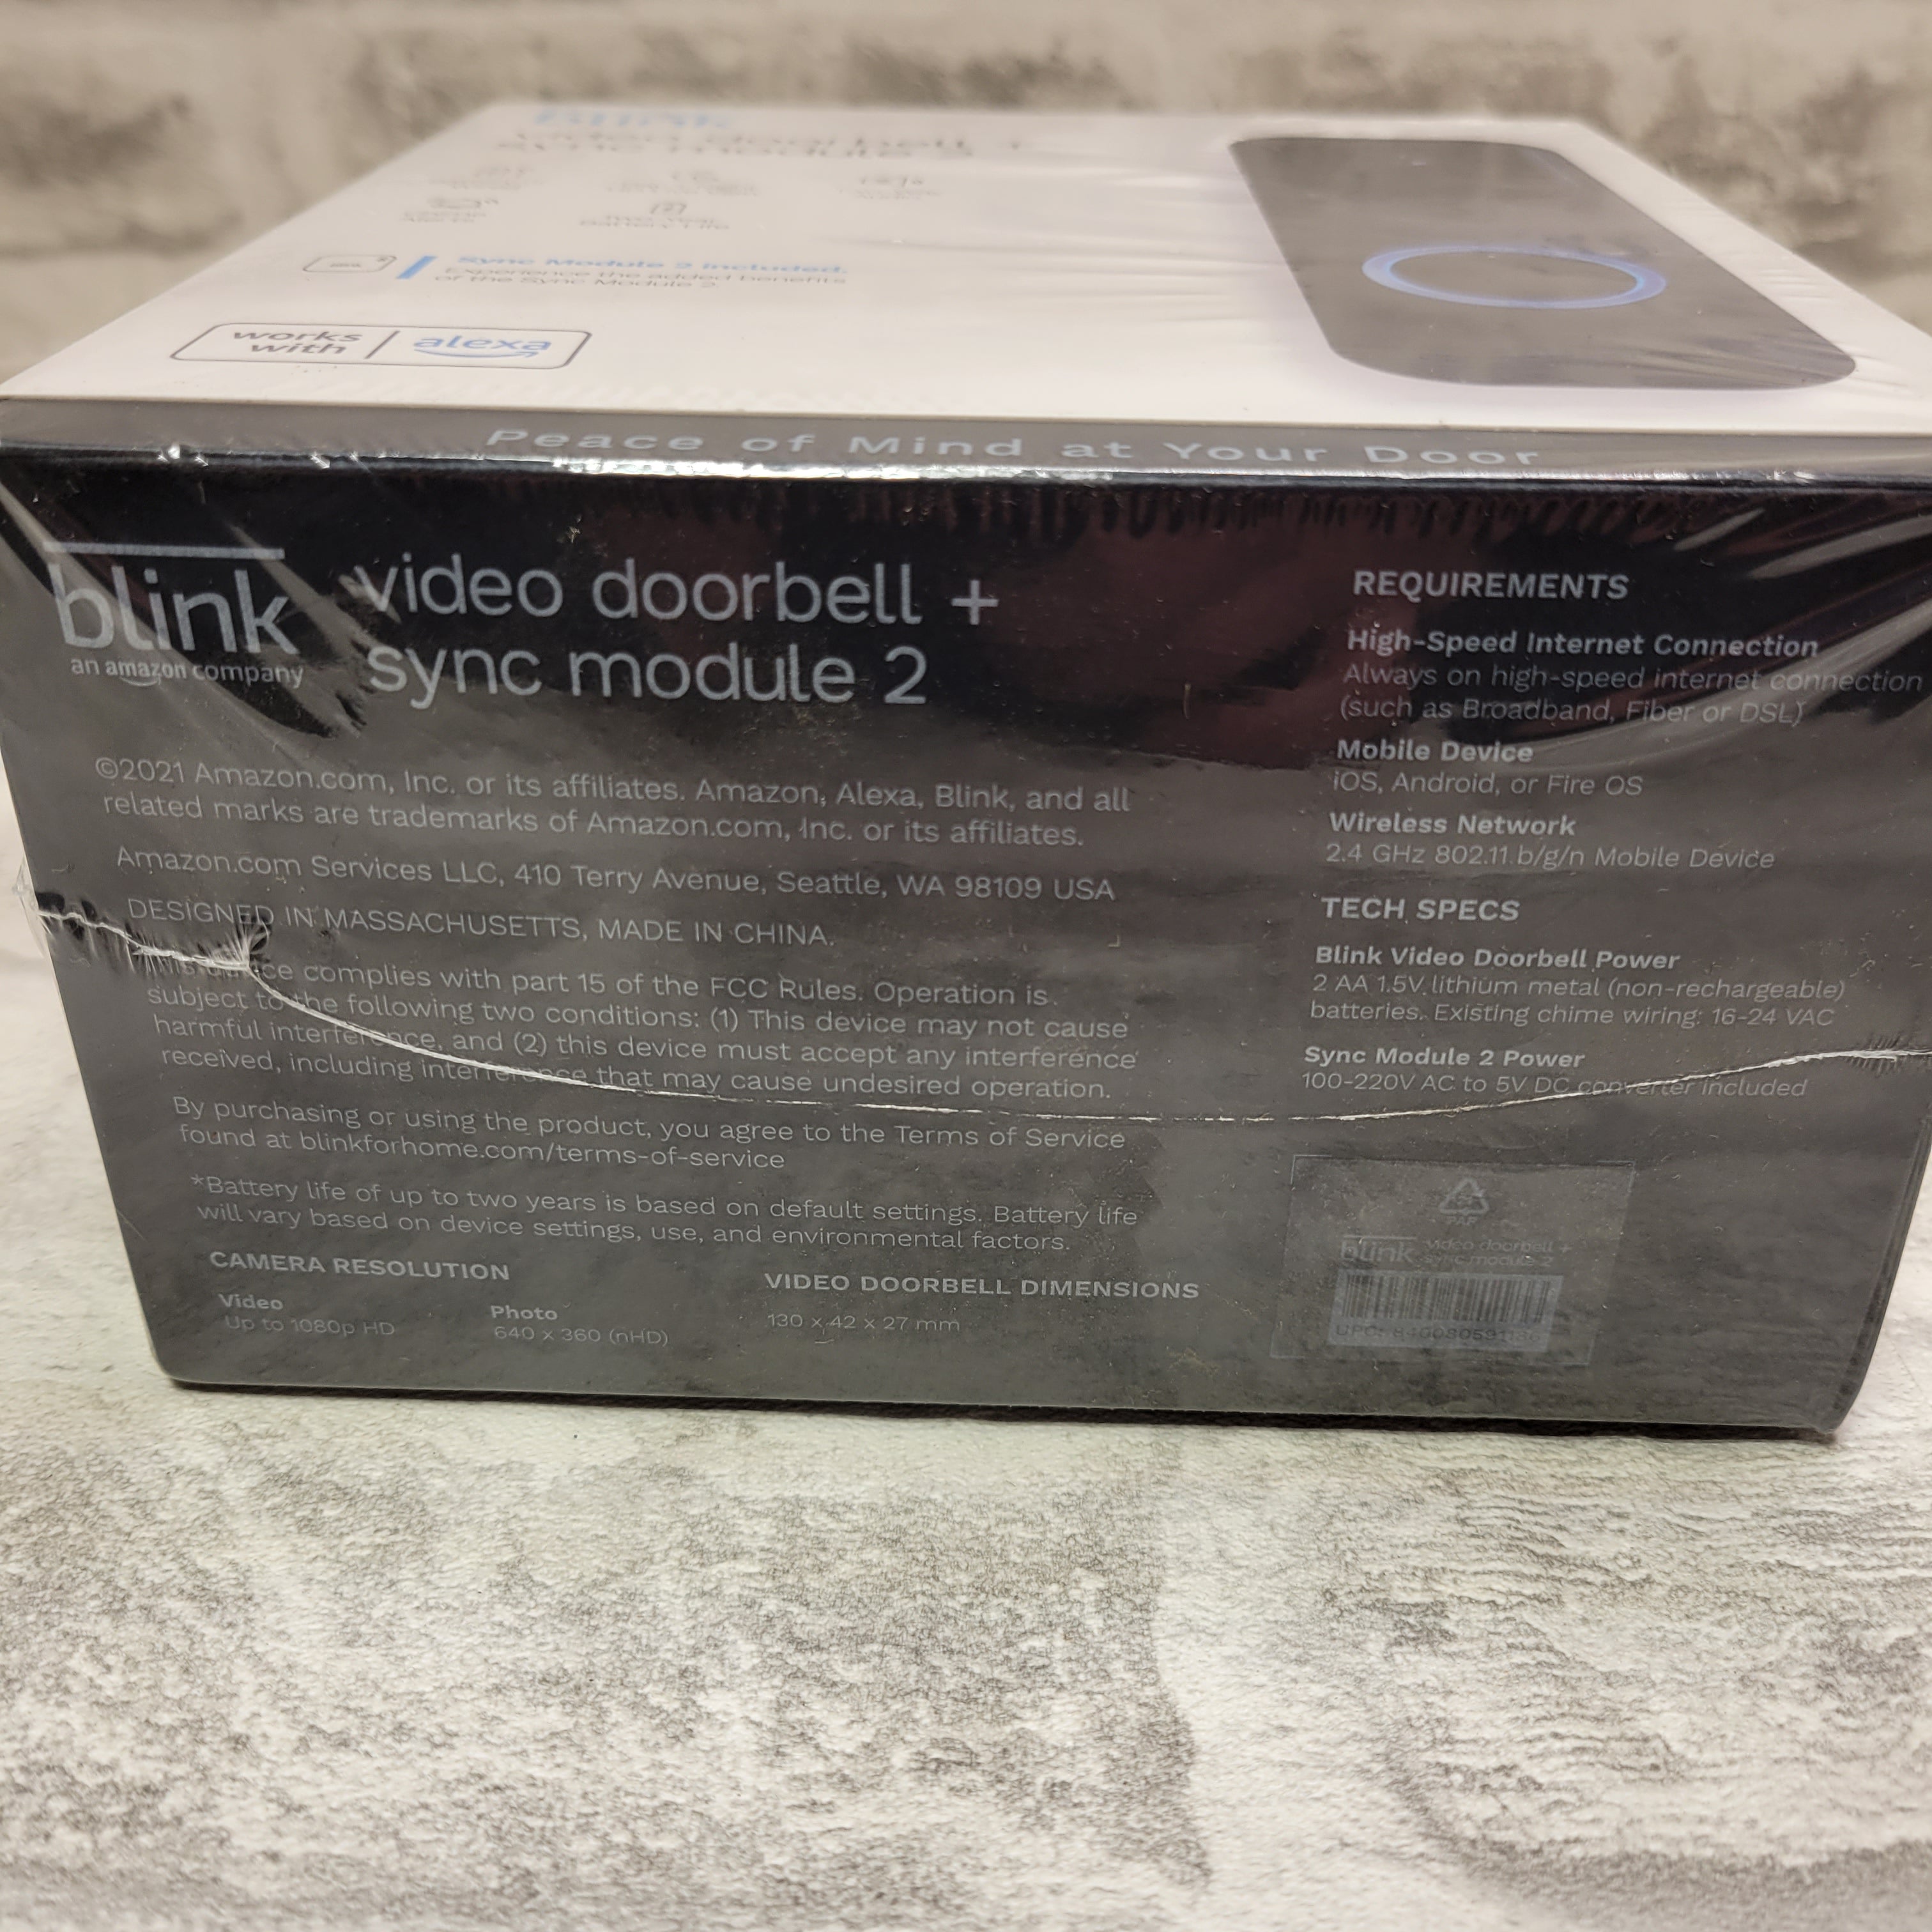 Blink Video Doorbell + Sync Module 2 | Two-way audio, wired or wire-free (Black) (7674248823022)